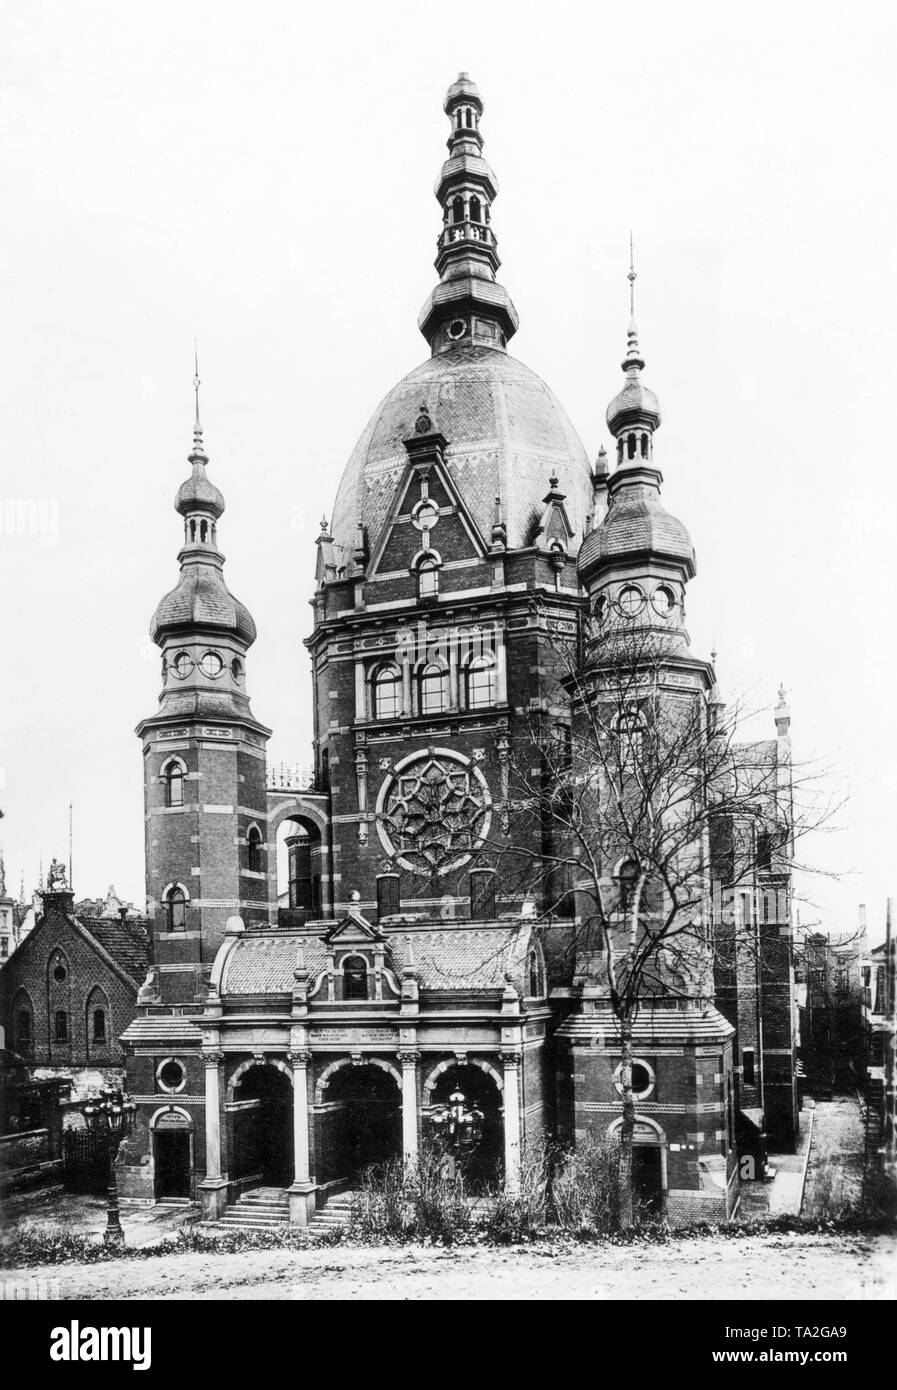 The Great Synagogue on Reitbahnstrasse in Gdansk was built from 1885 to 1887 in neo-Renaissance style according to the plans of architects Hermann Endes and Wilhelm Boeckmanns. In April 1939 the synagogue was destroyed by the National Socialists. Stock Photo